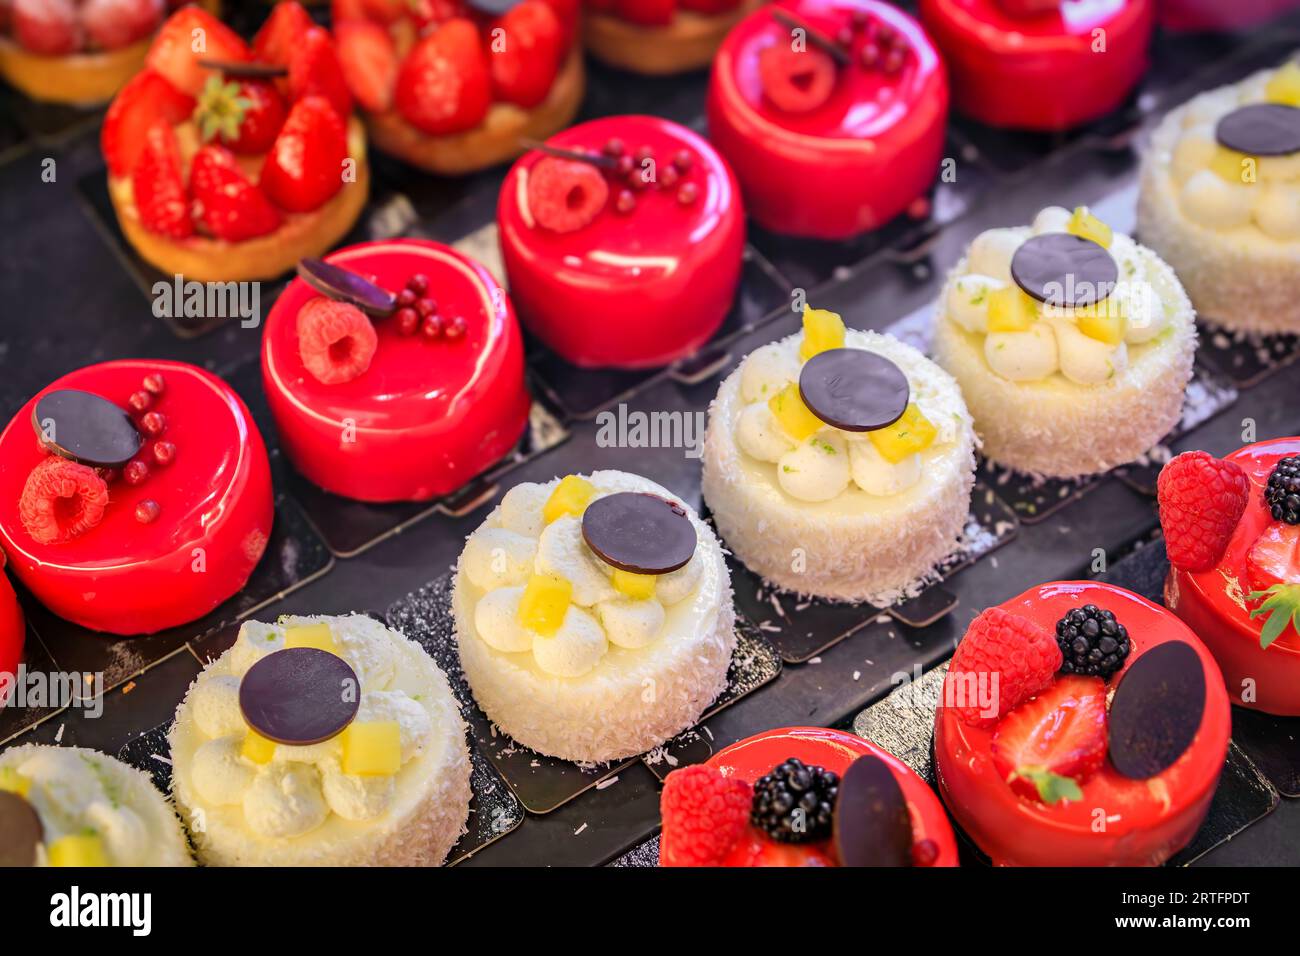 Selection of delicate petit four desserts on display at an artisanal bakery cafe in Old Town or Vieille Ville in Nice, French Riviera, South of France Stock Photo